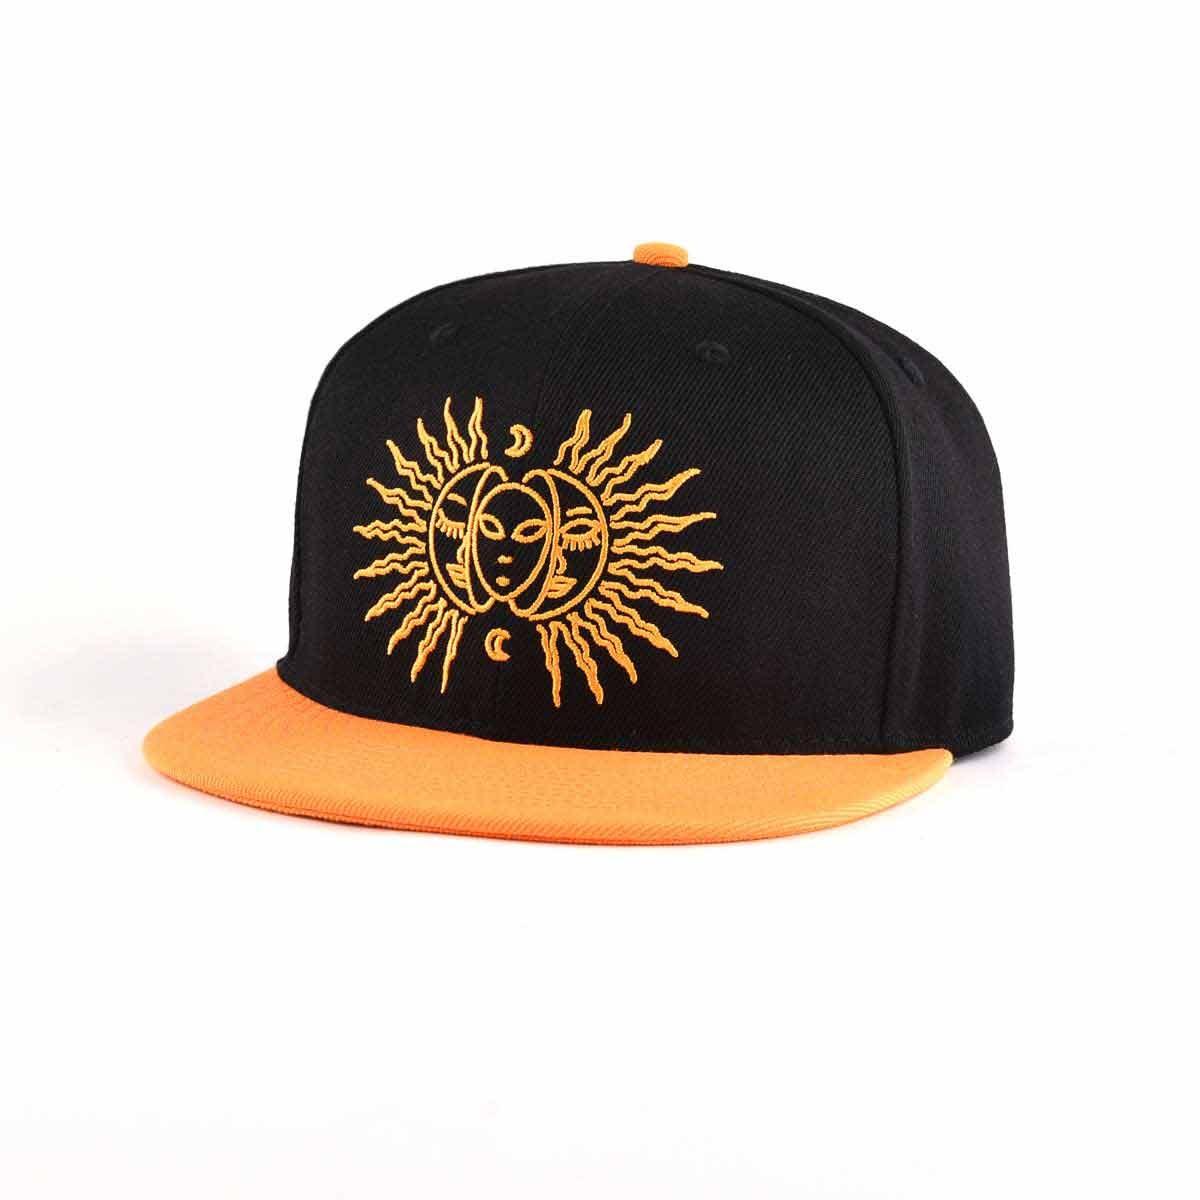 Aung-Crown-black-snapback-hat-with-a-flat-embroidery-logo-ACNA2011129